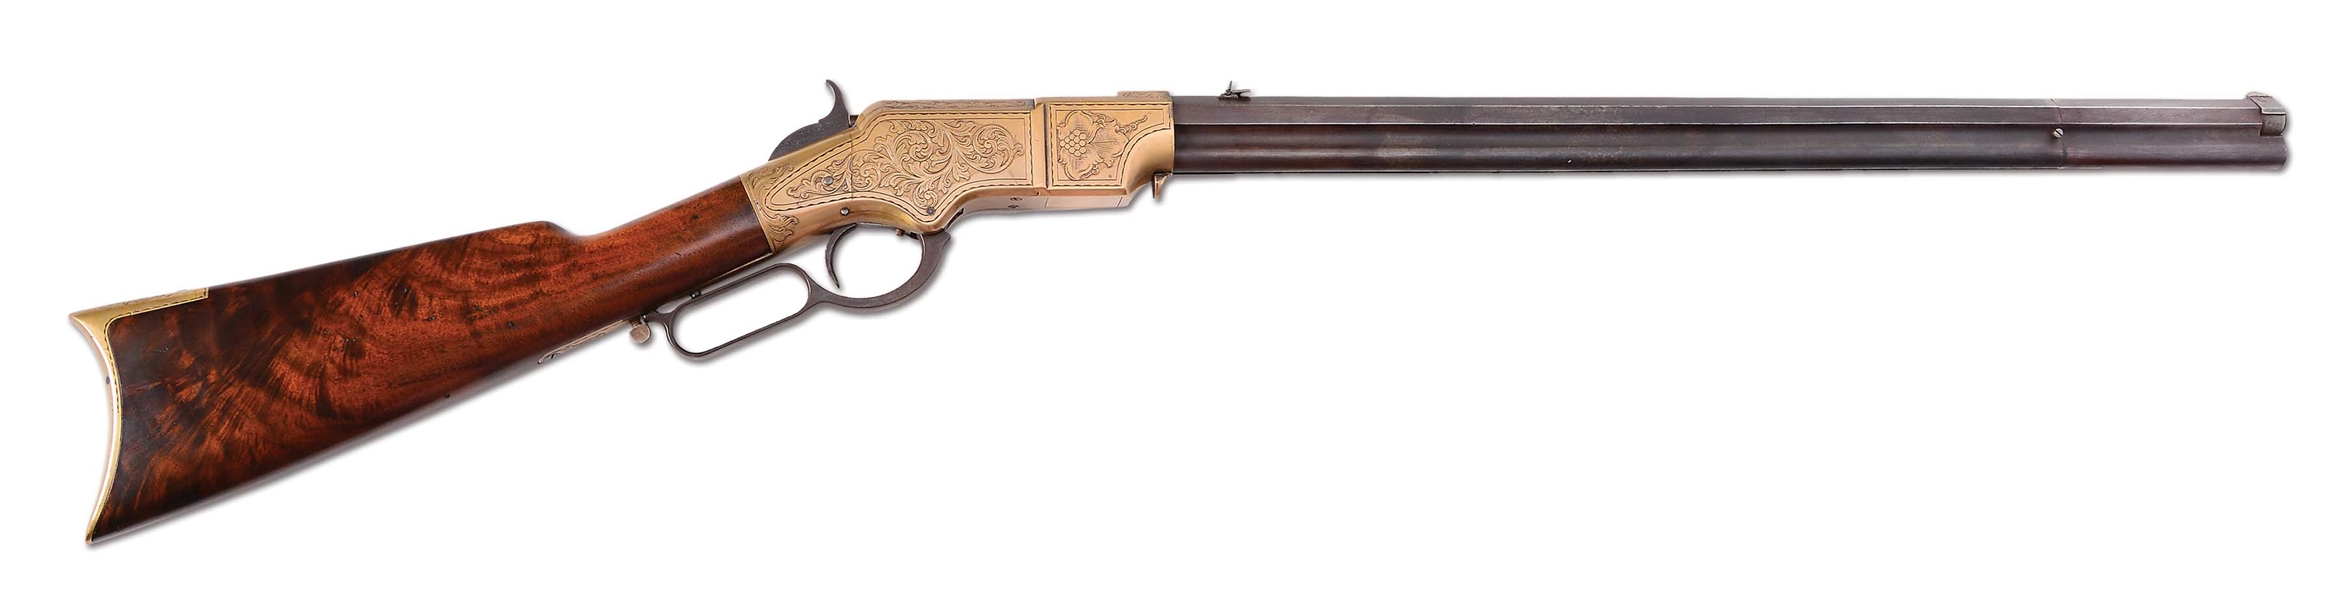 (A) LOVELY ENGRAVED HENRY LEVER ACTION RIFLE (1864).